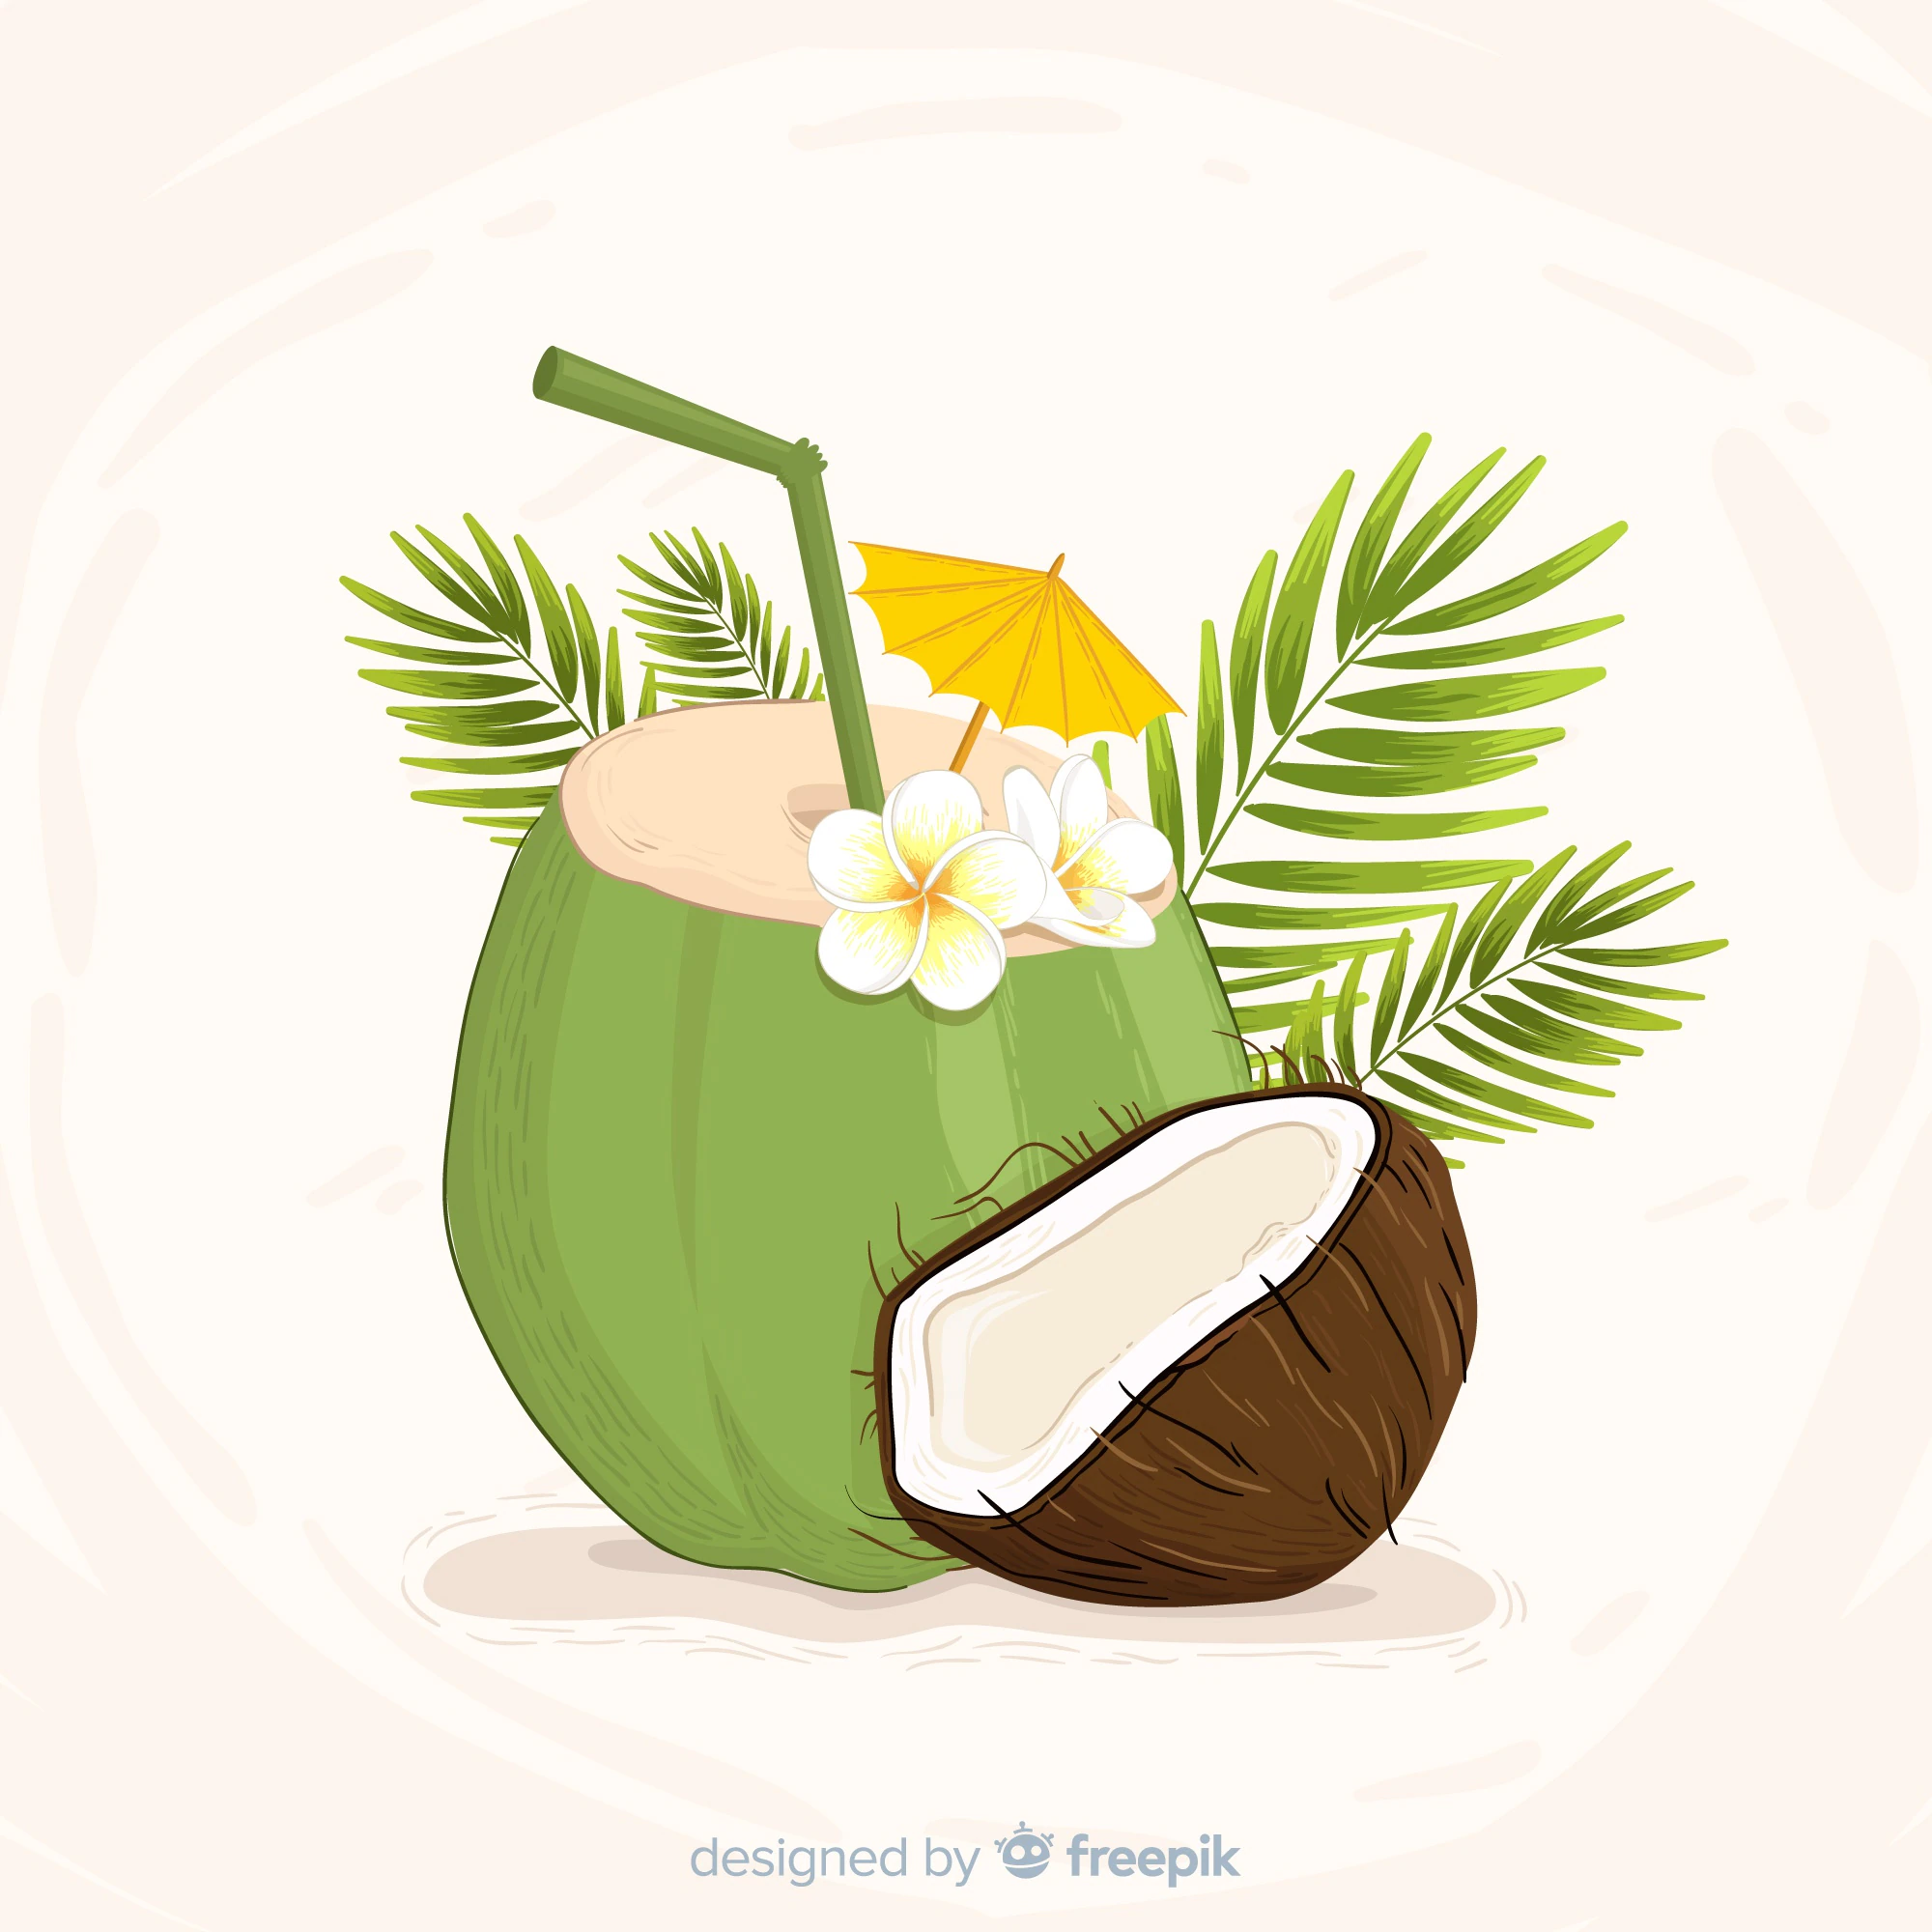 World Coconut Day 2022: Current Theme, Quotes, Messages, Drawings, Slogans, and Wishes